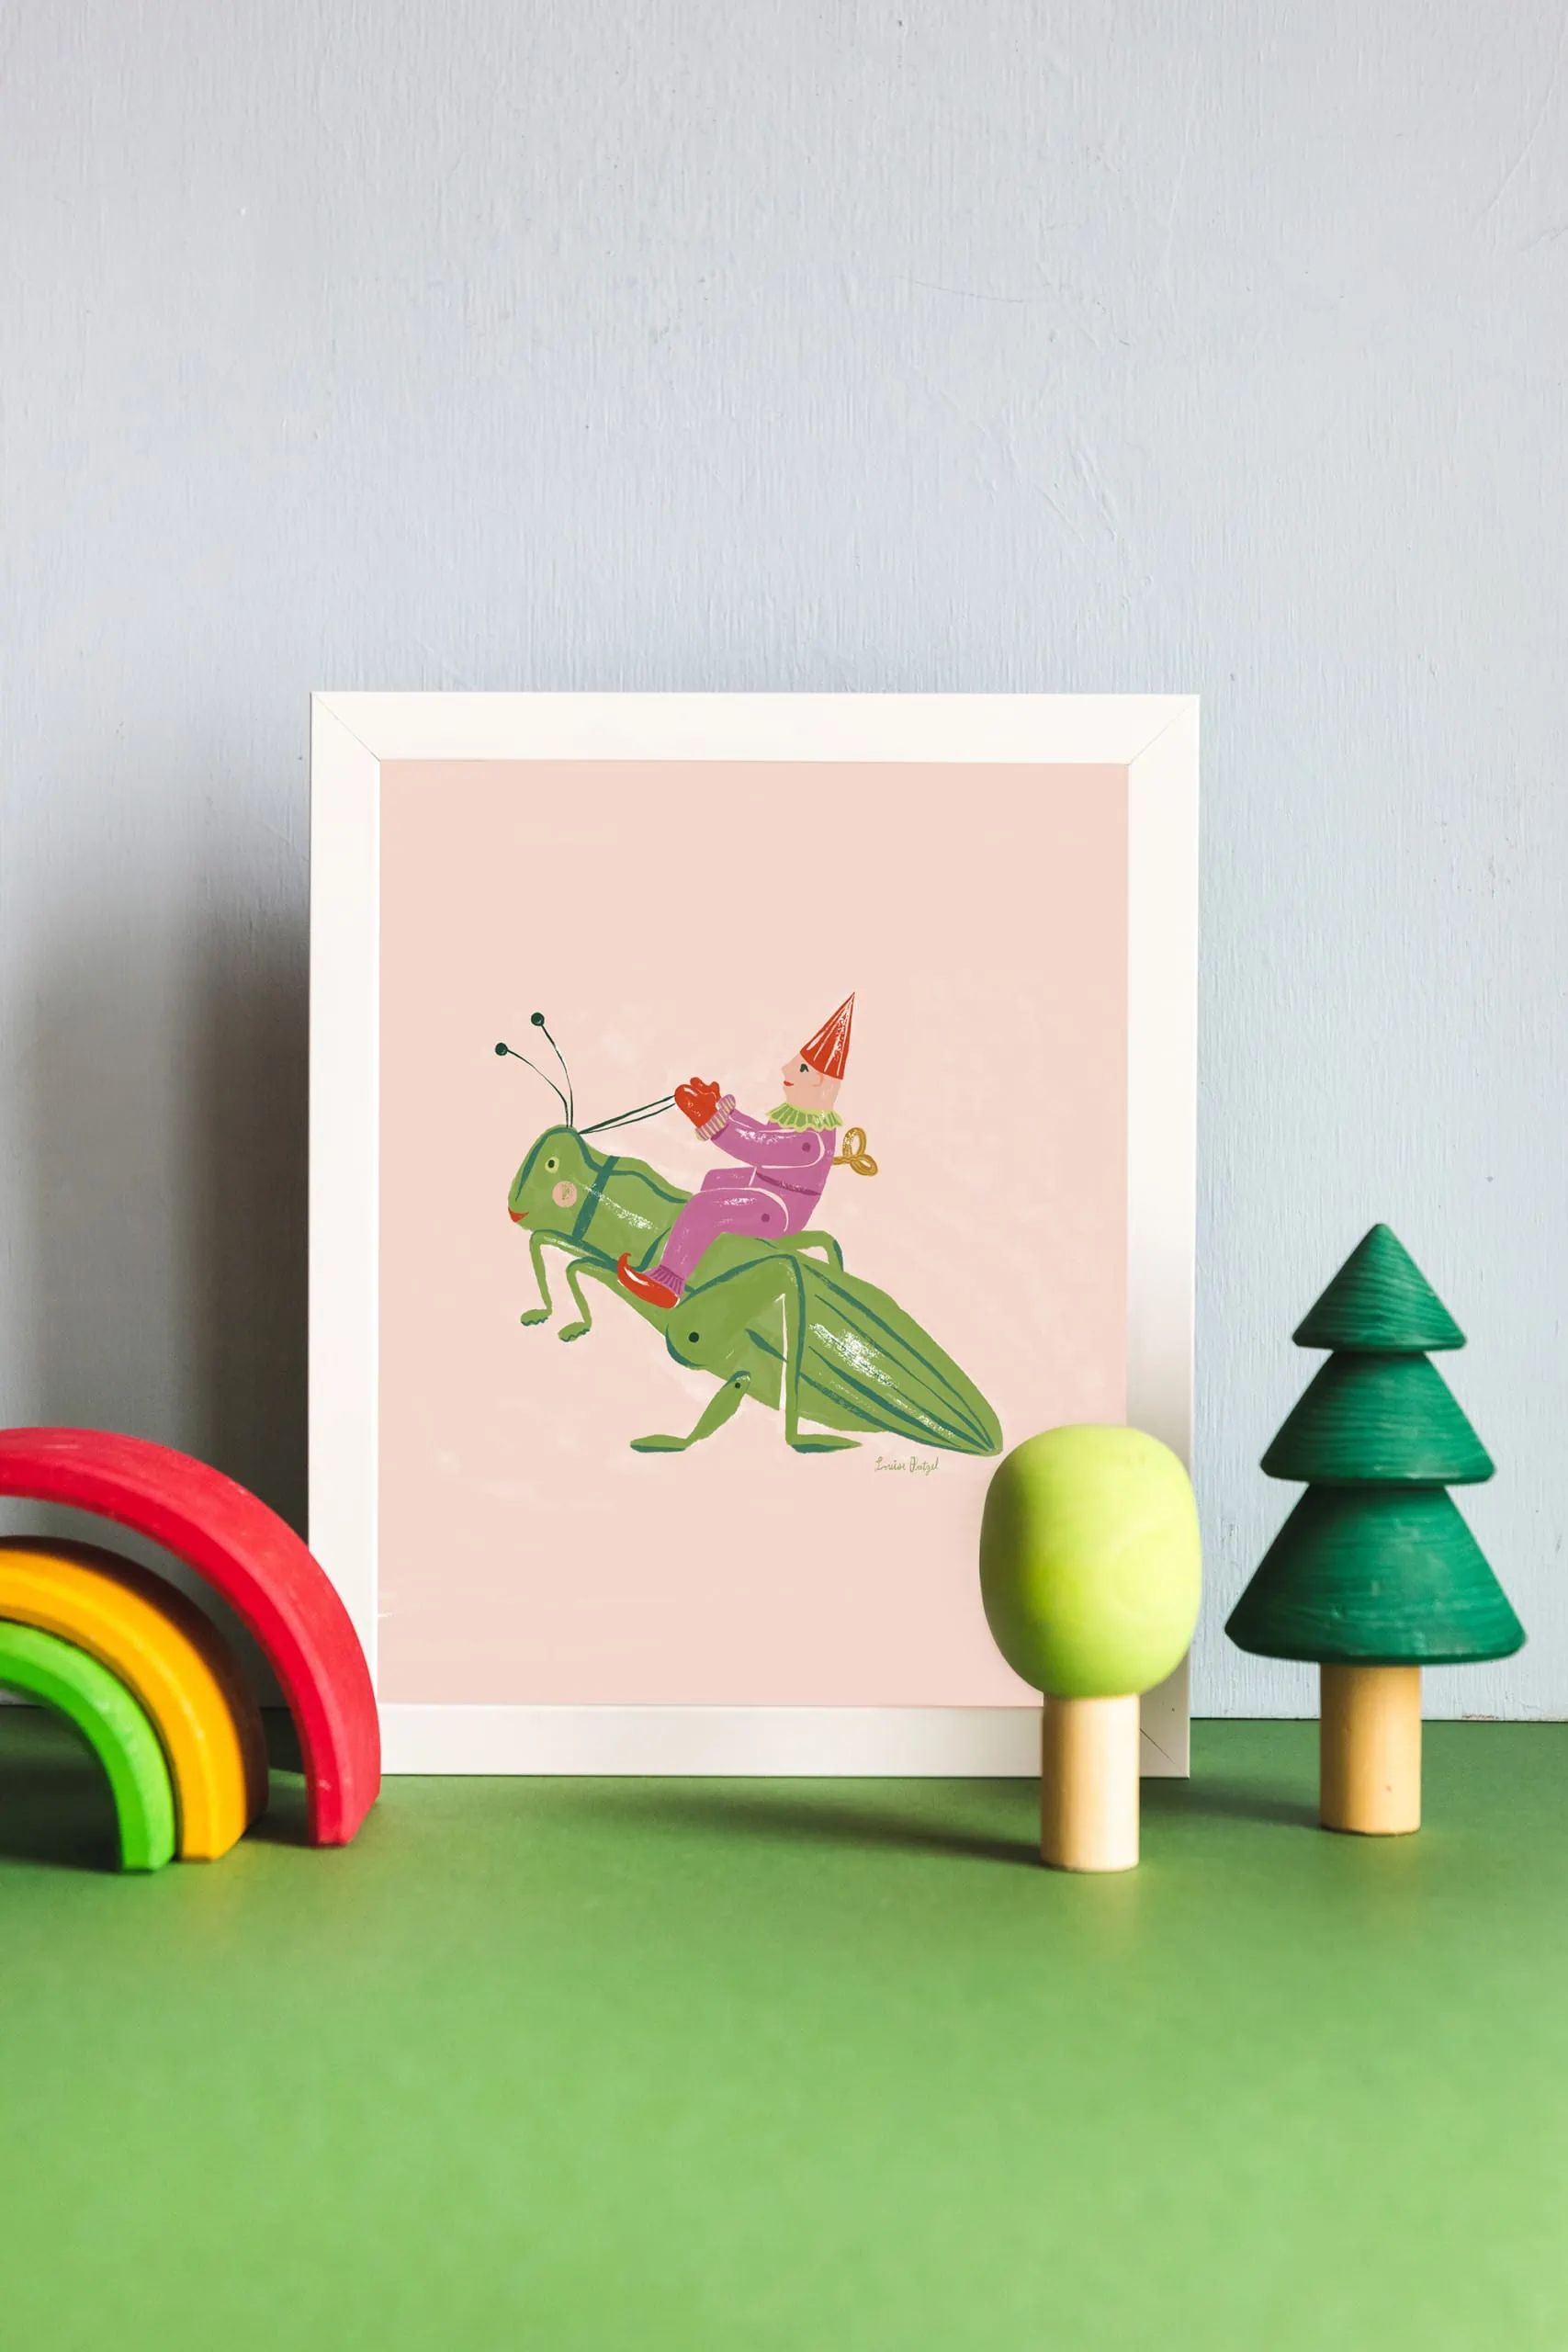 A print of Louise Pretzel's Grasshopper leaning against a light blue wall with wooden rainbow and tree toys in front of it.